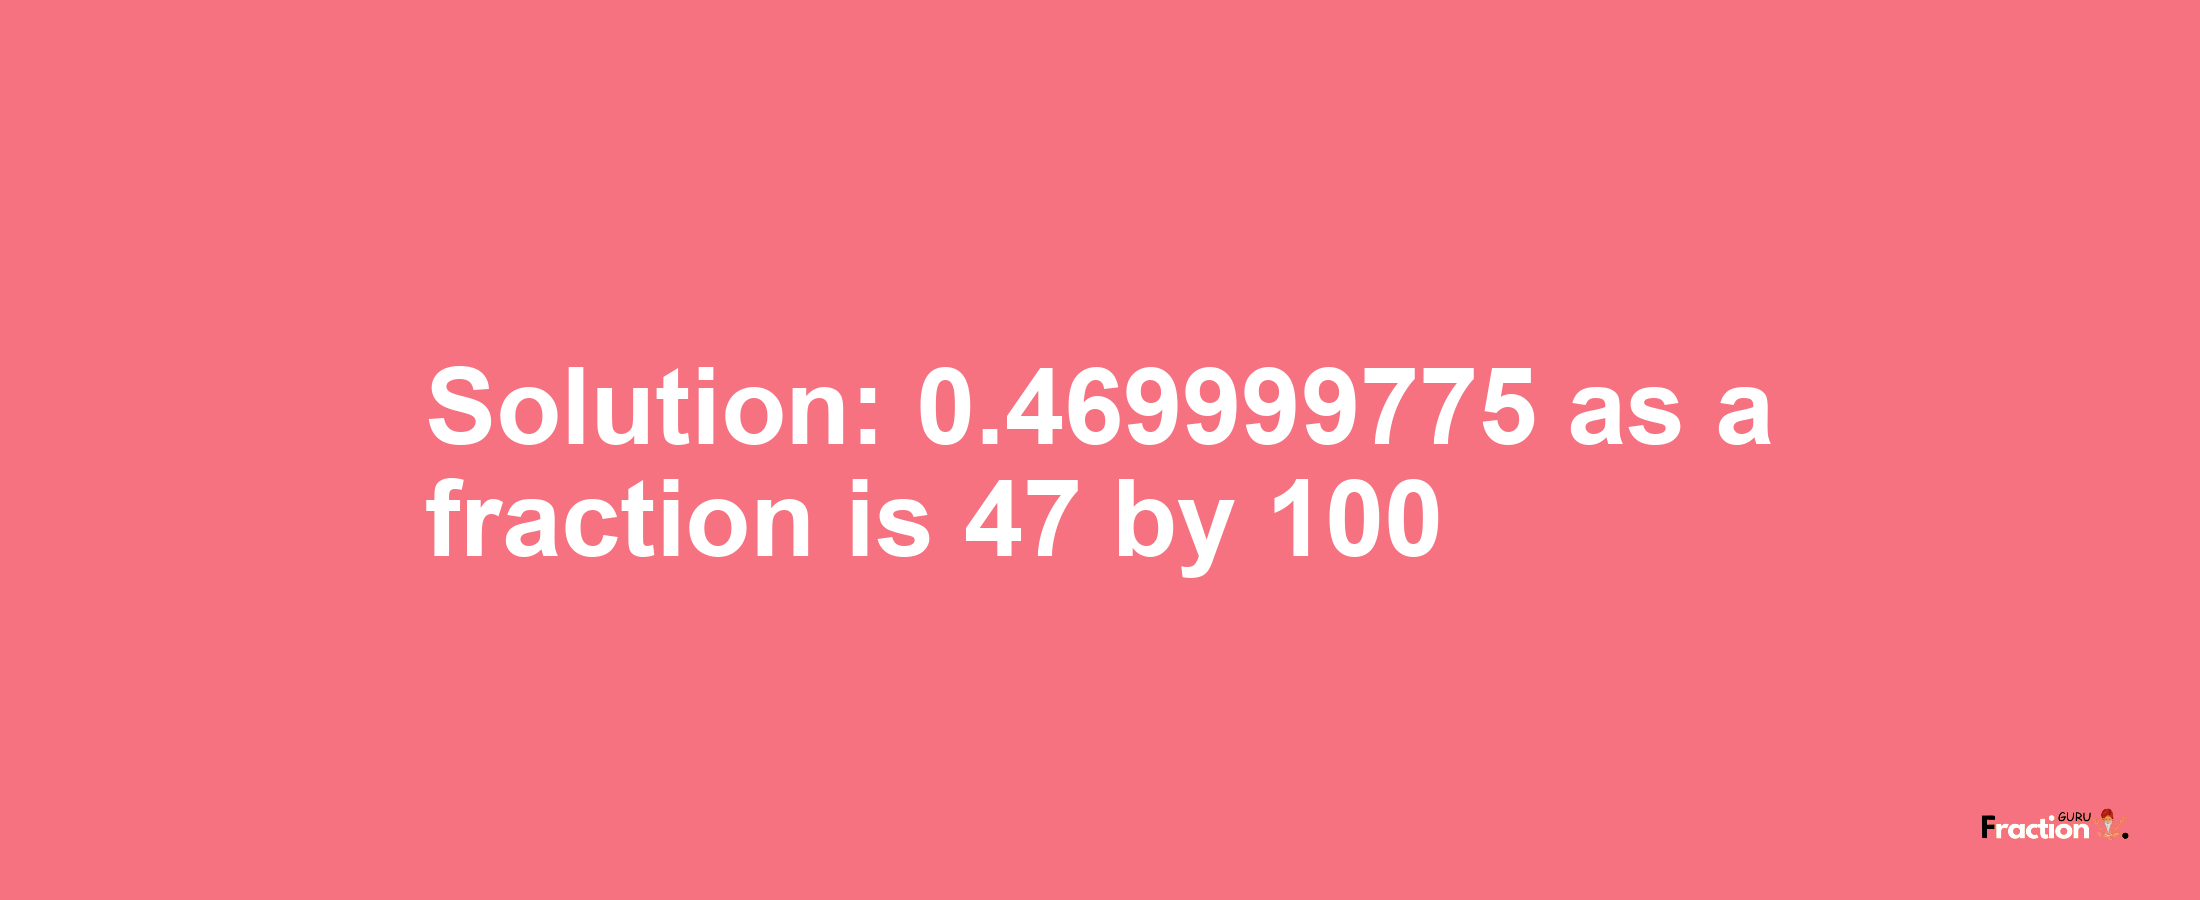 Solution:0.469999775 as a fraction is 47/100